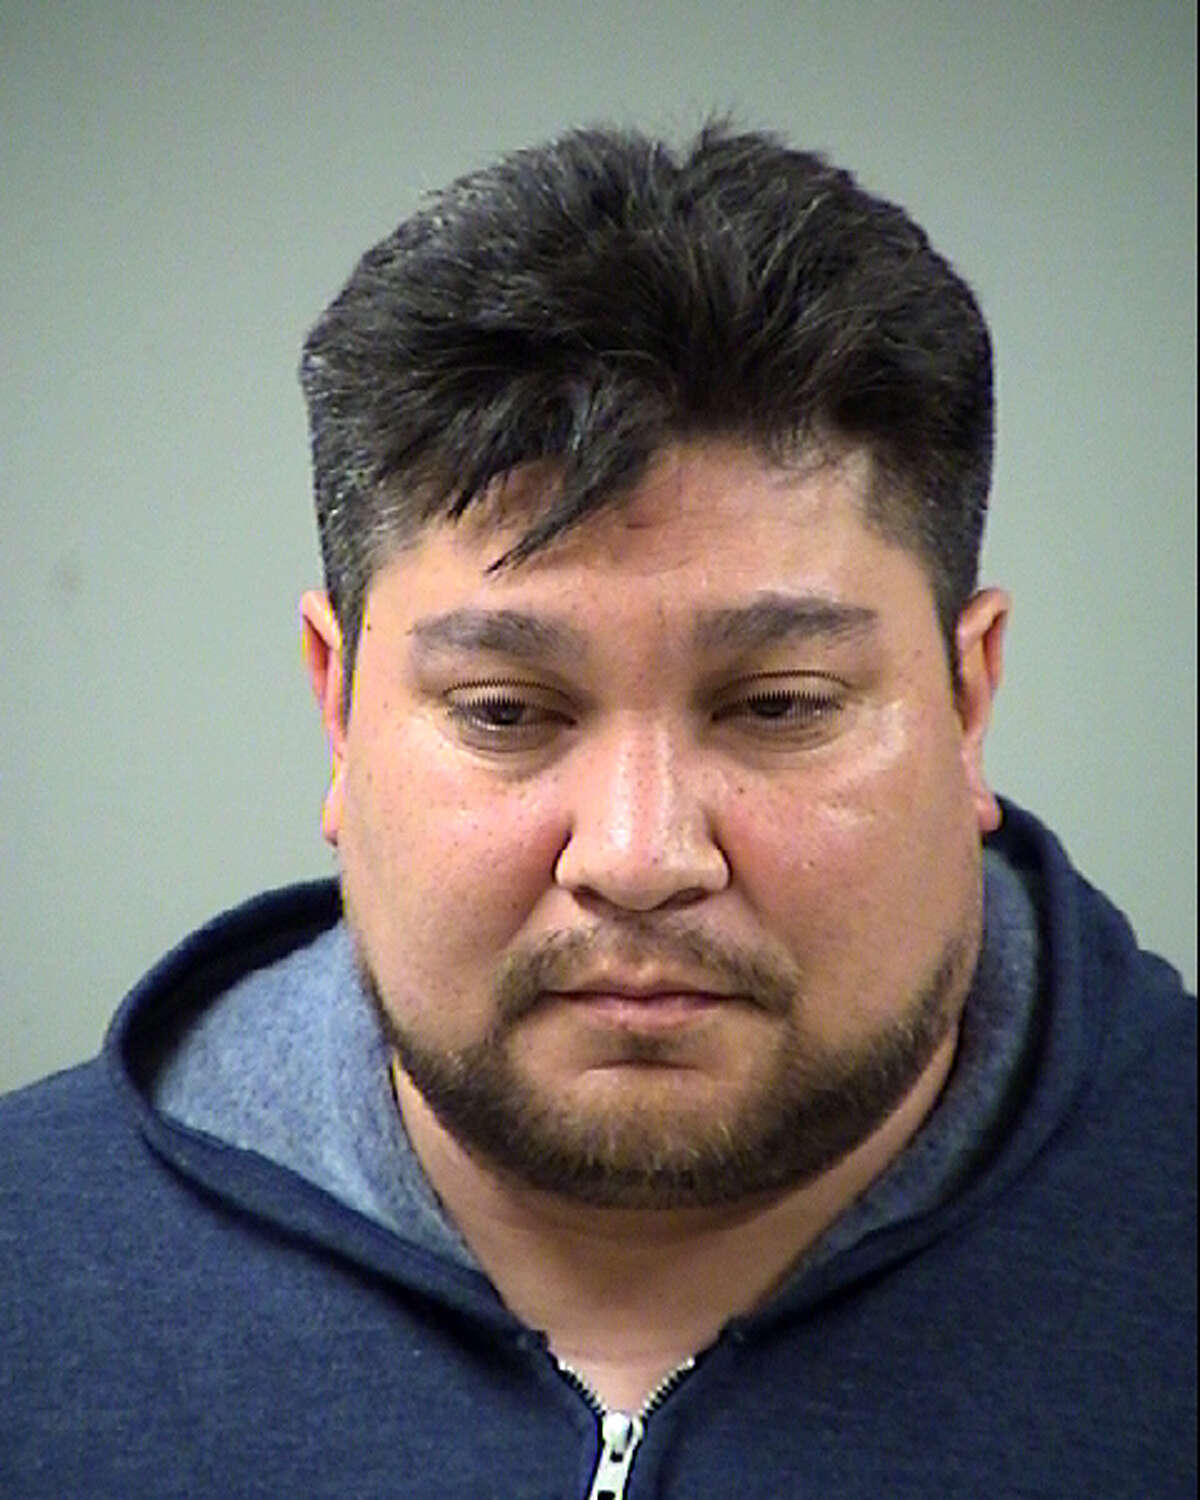 Daniel Longoria was charged with aggravated assault causing serious bodily injury after he punched a man, 30, in the bar where Longoria worked. The man later died.